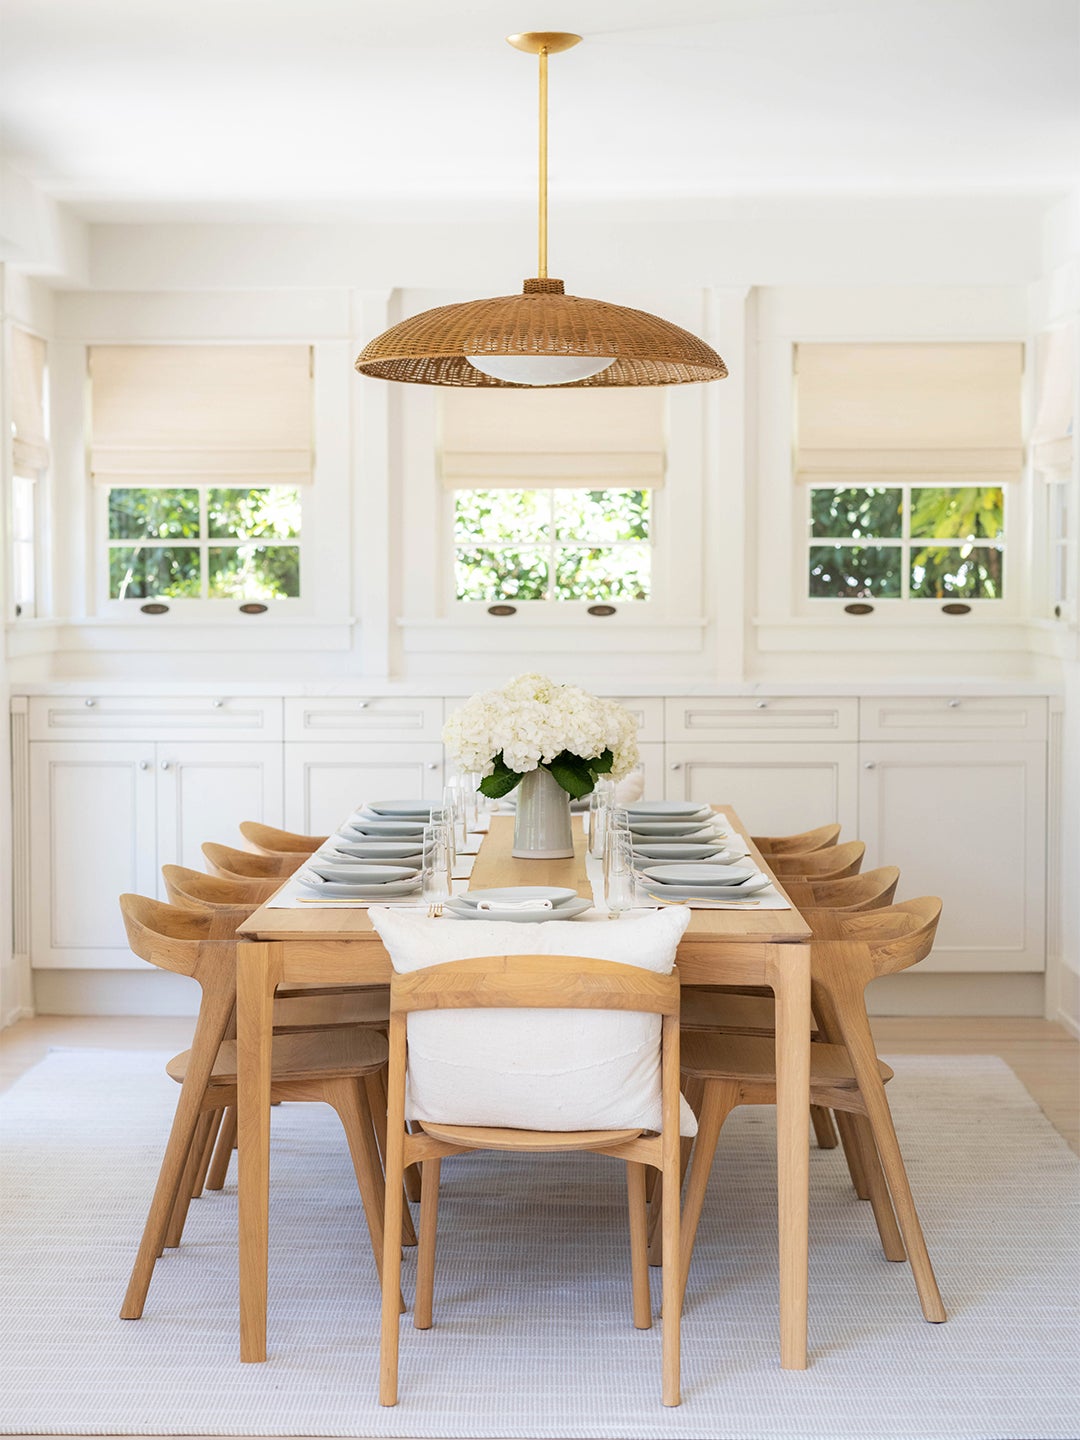 Dining room table with wooden chairs